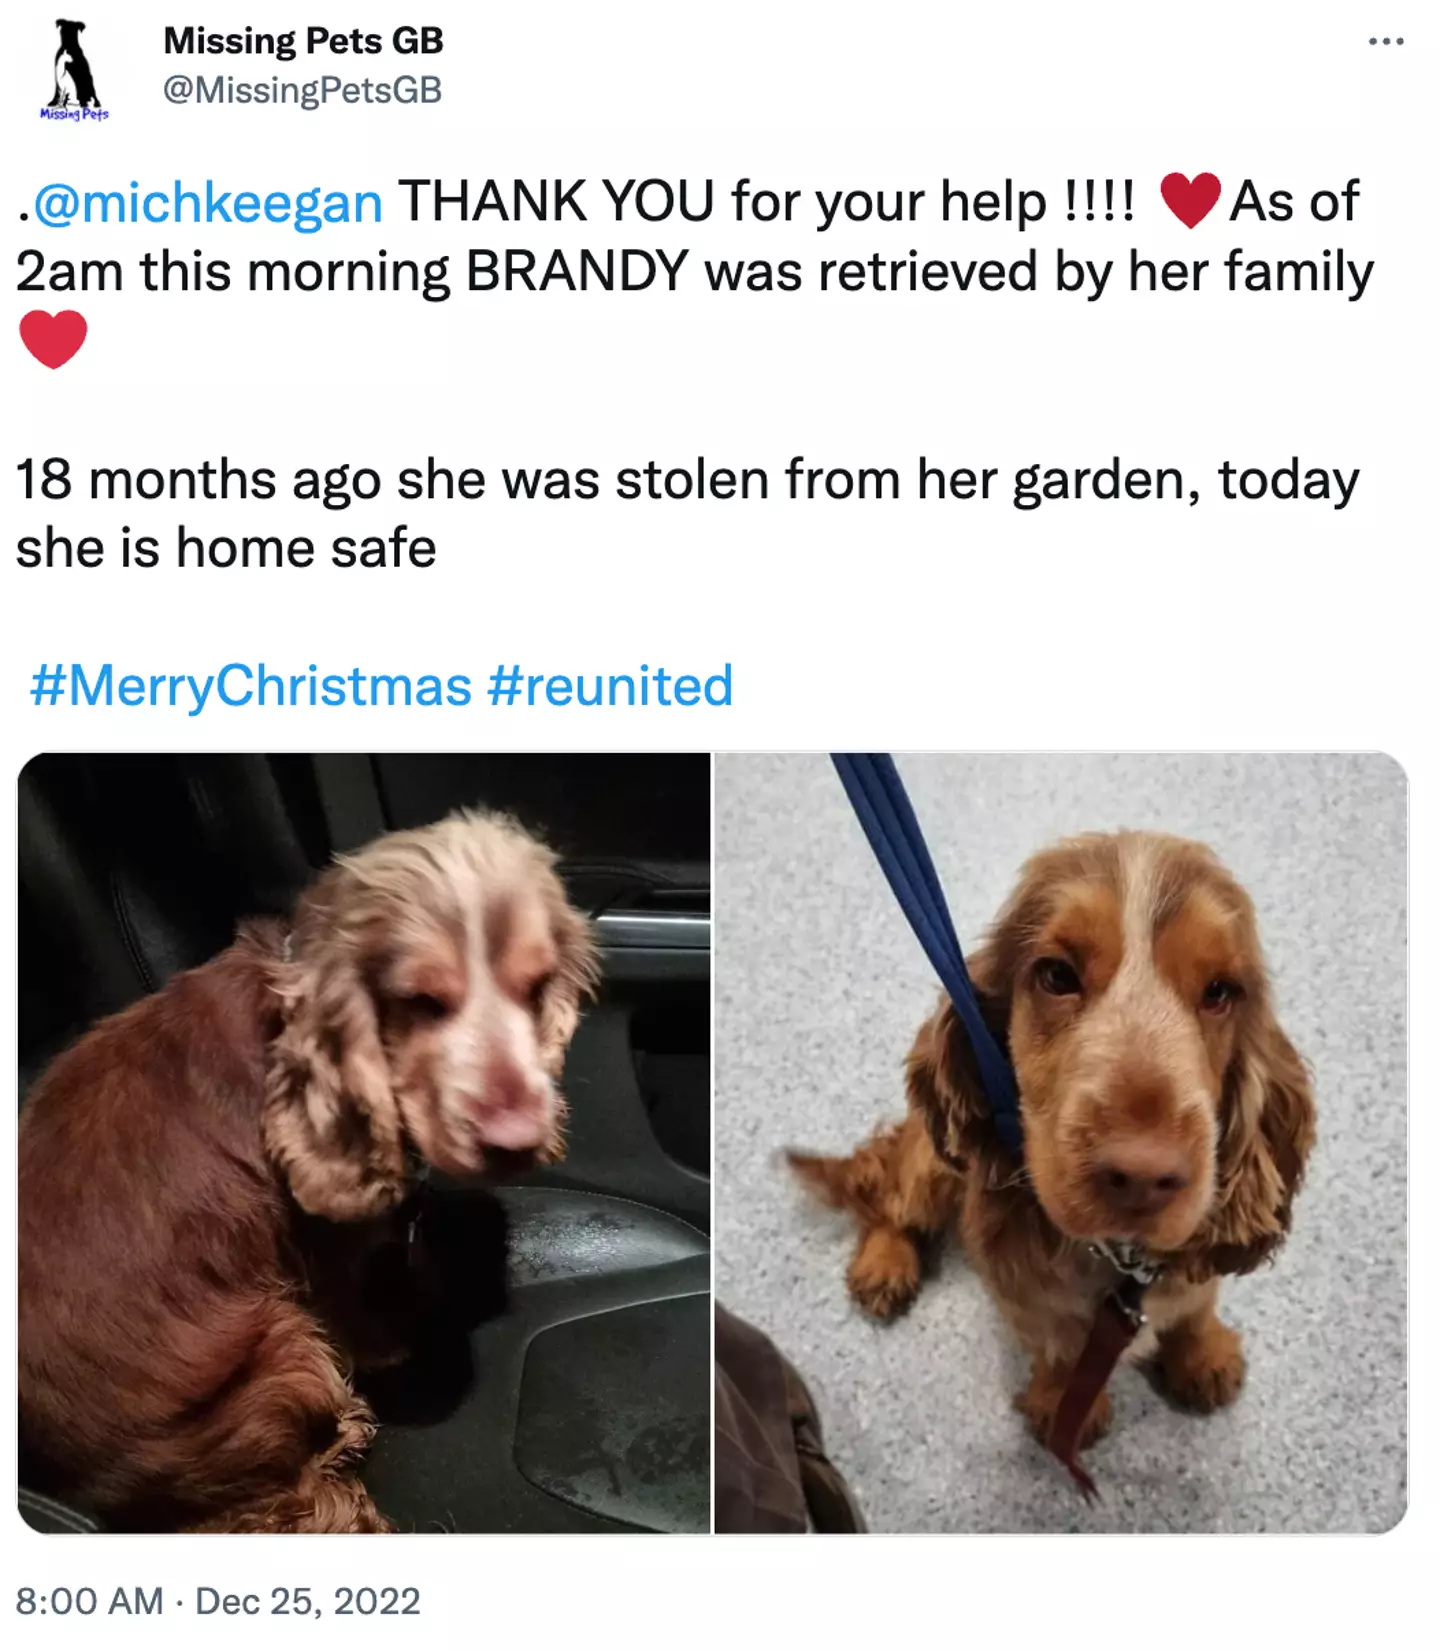 The pup has now been reunited with her family.